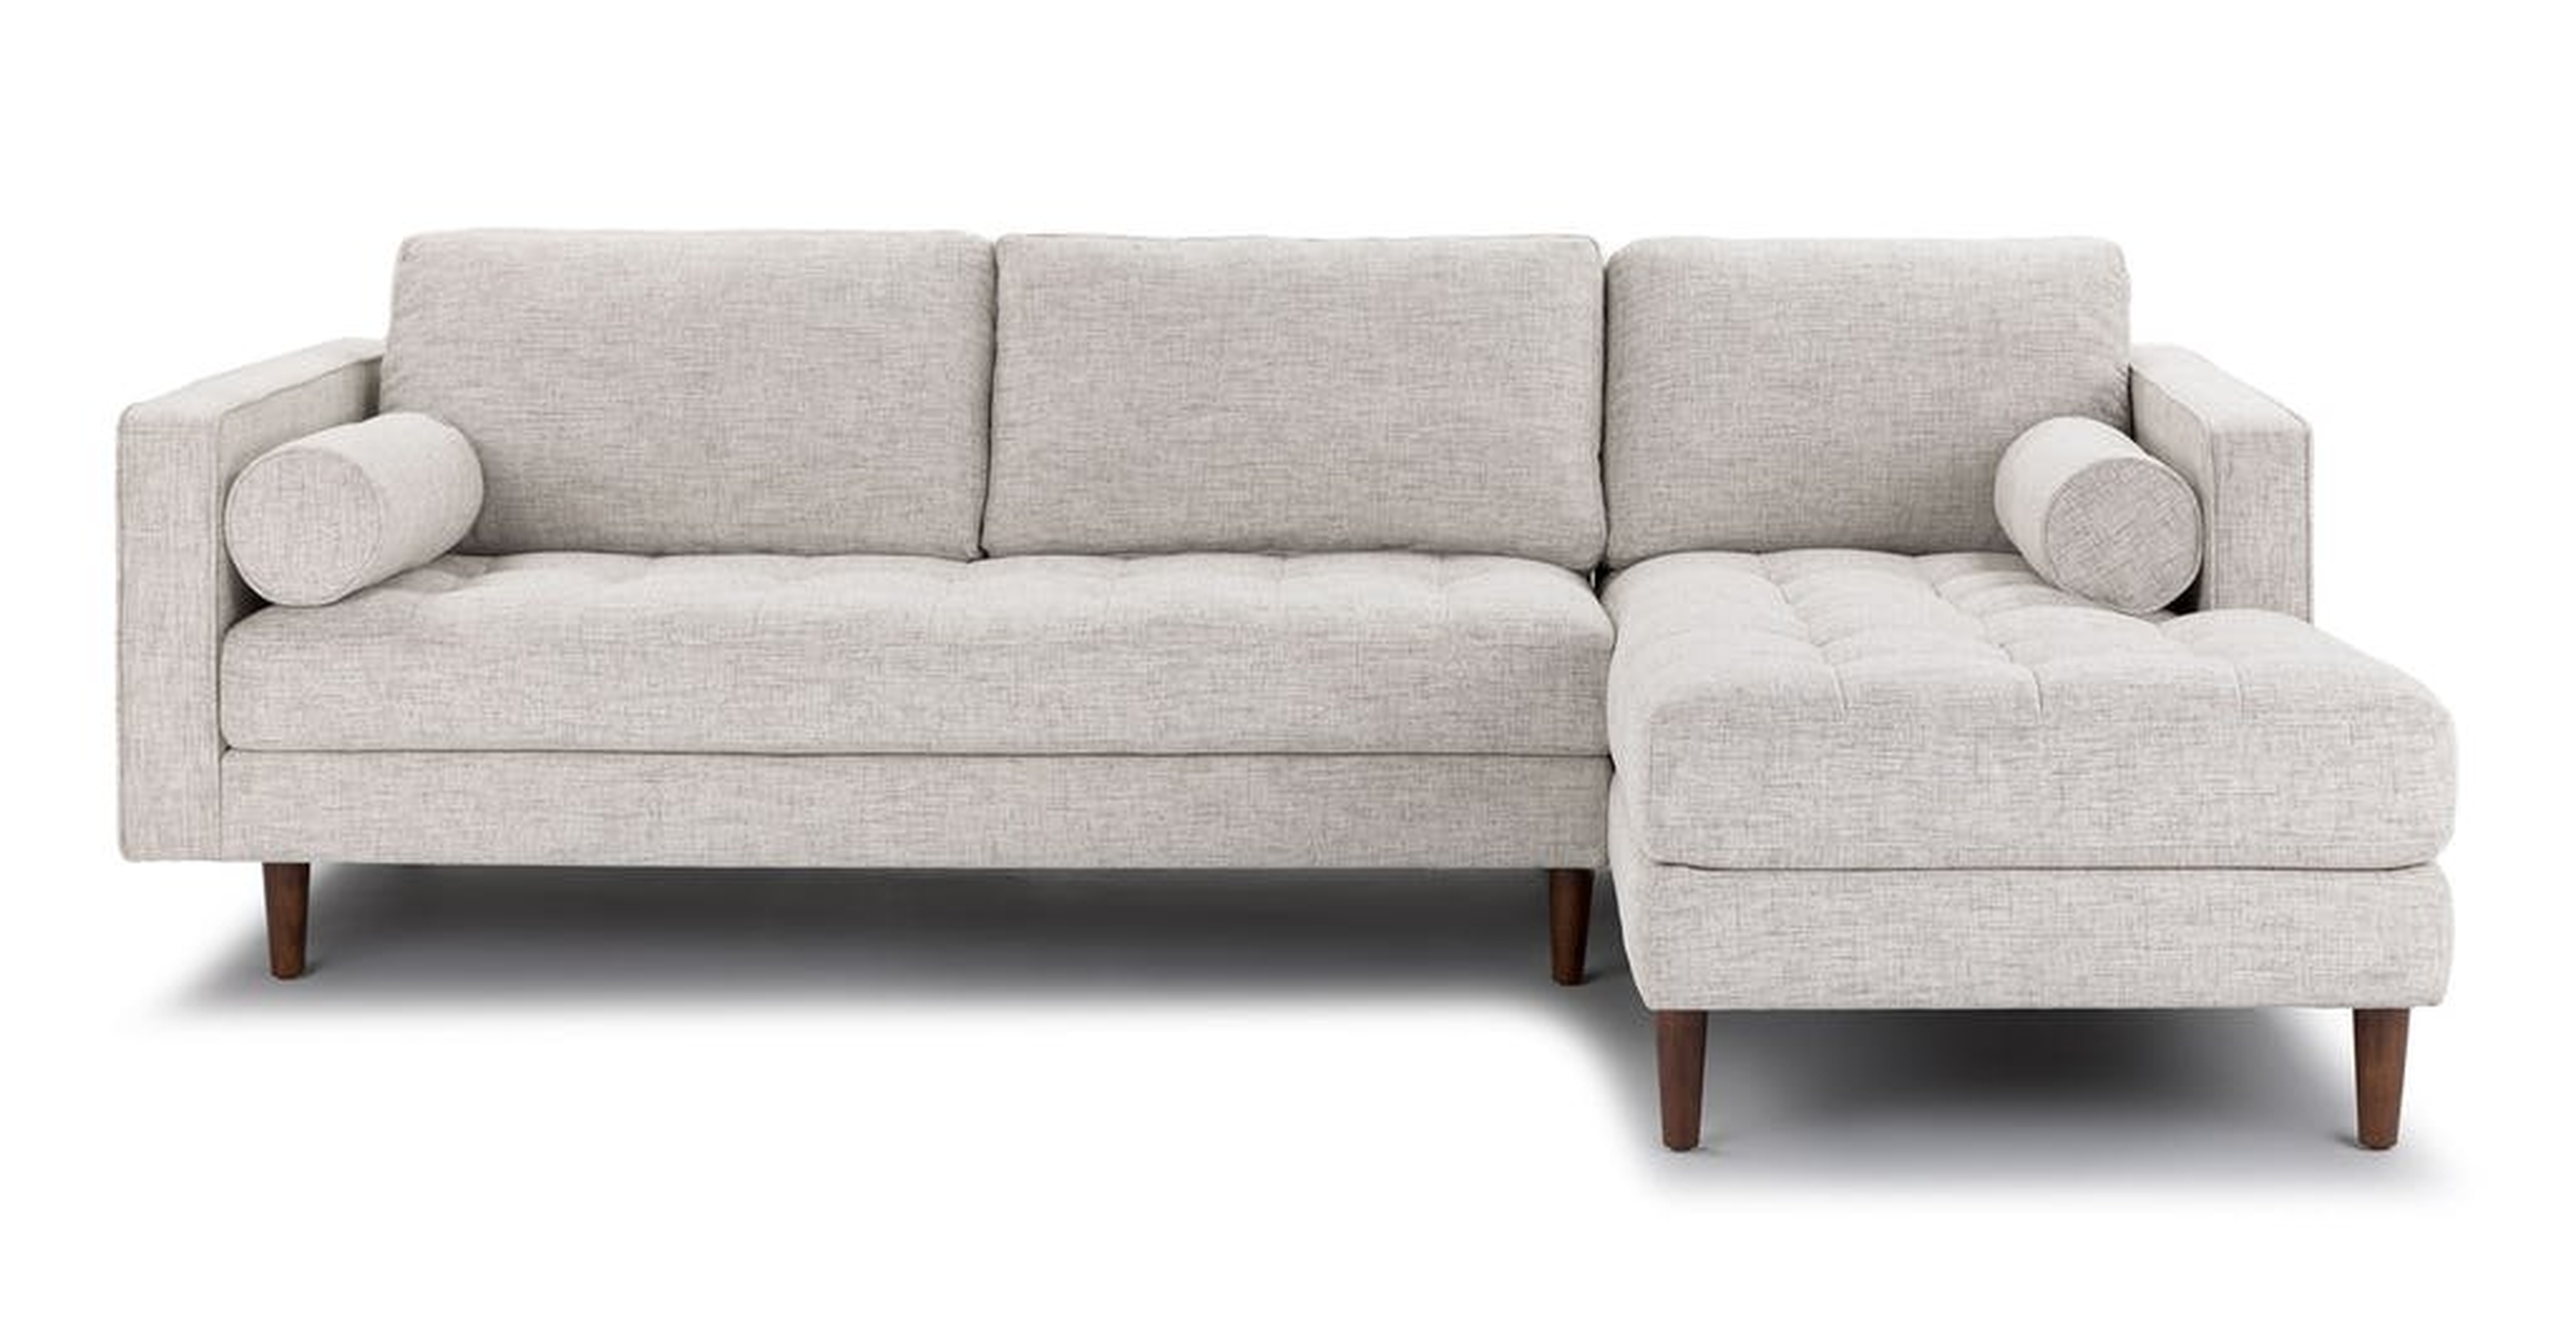 Sven Birch Ivory Right Sectional Sofa - Article